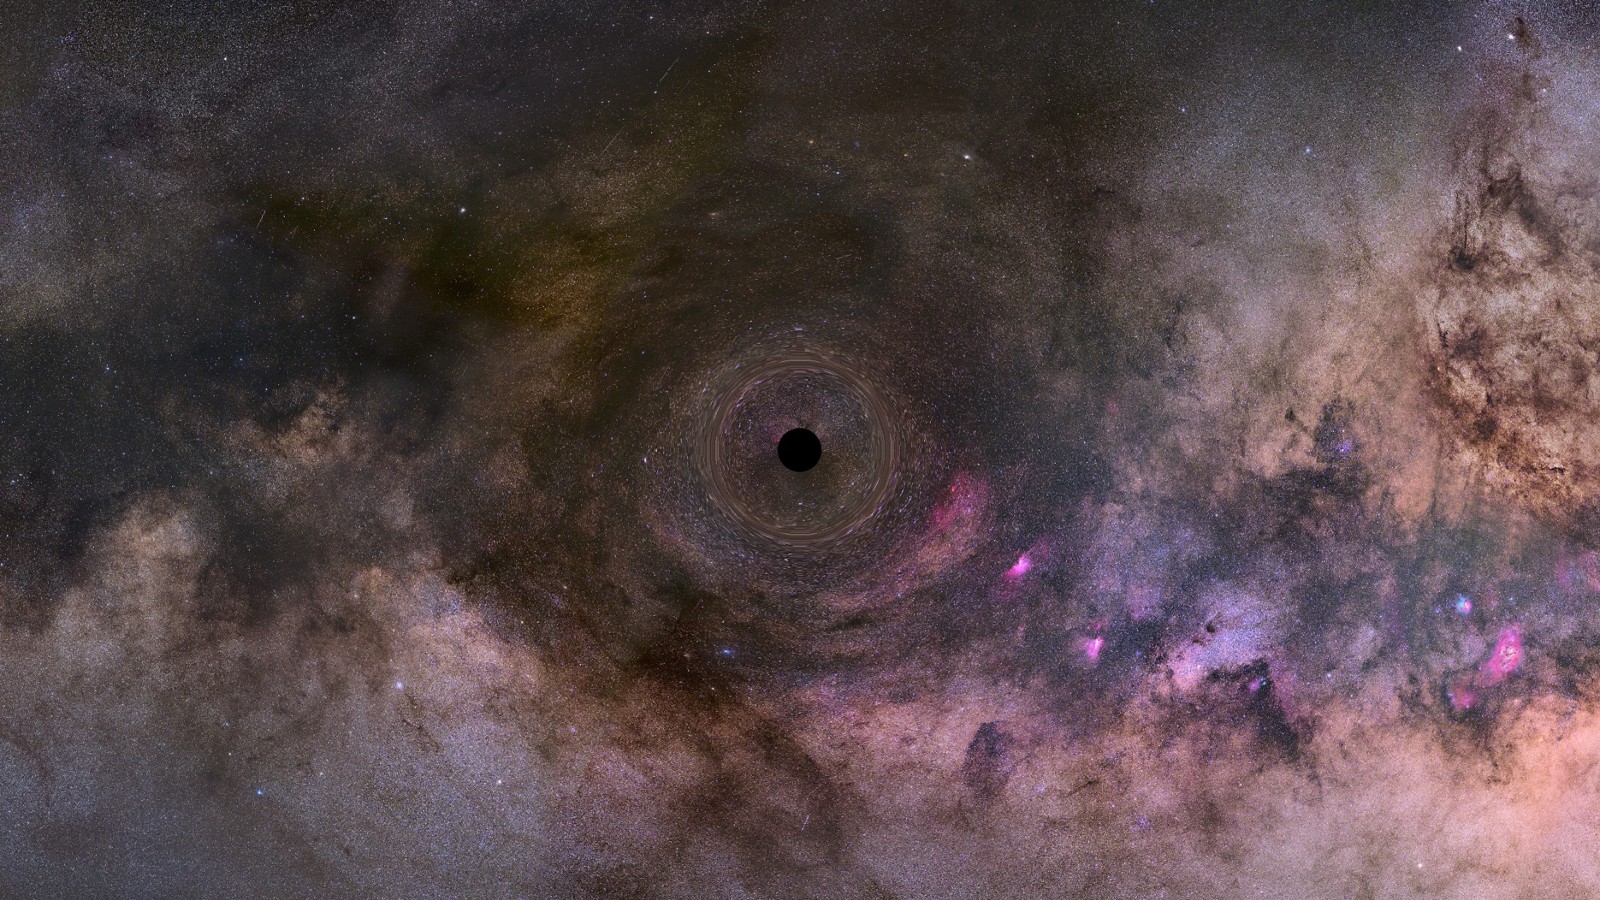 The illustration shows a black hole drifting through our galaxy. In the center of the image is a small black circle with a visible accretion disk (a disk-like flow of gas, plasma, dust, or particles).